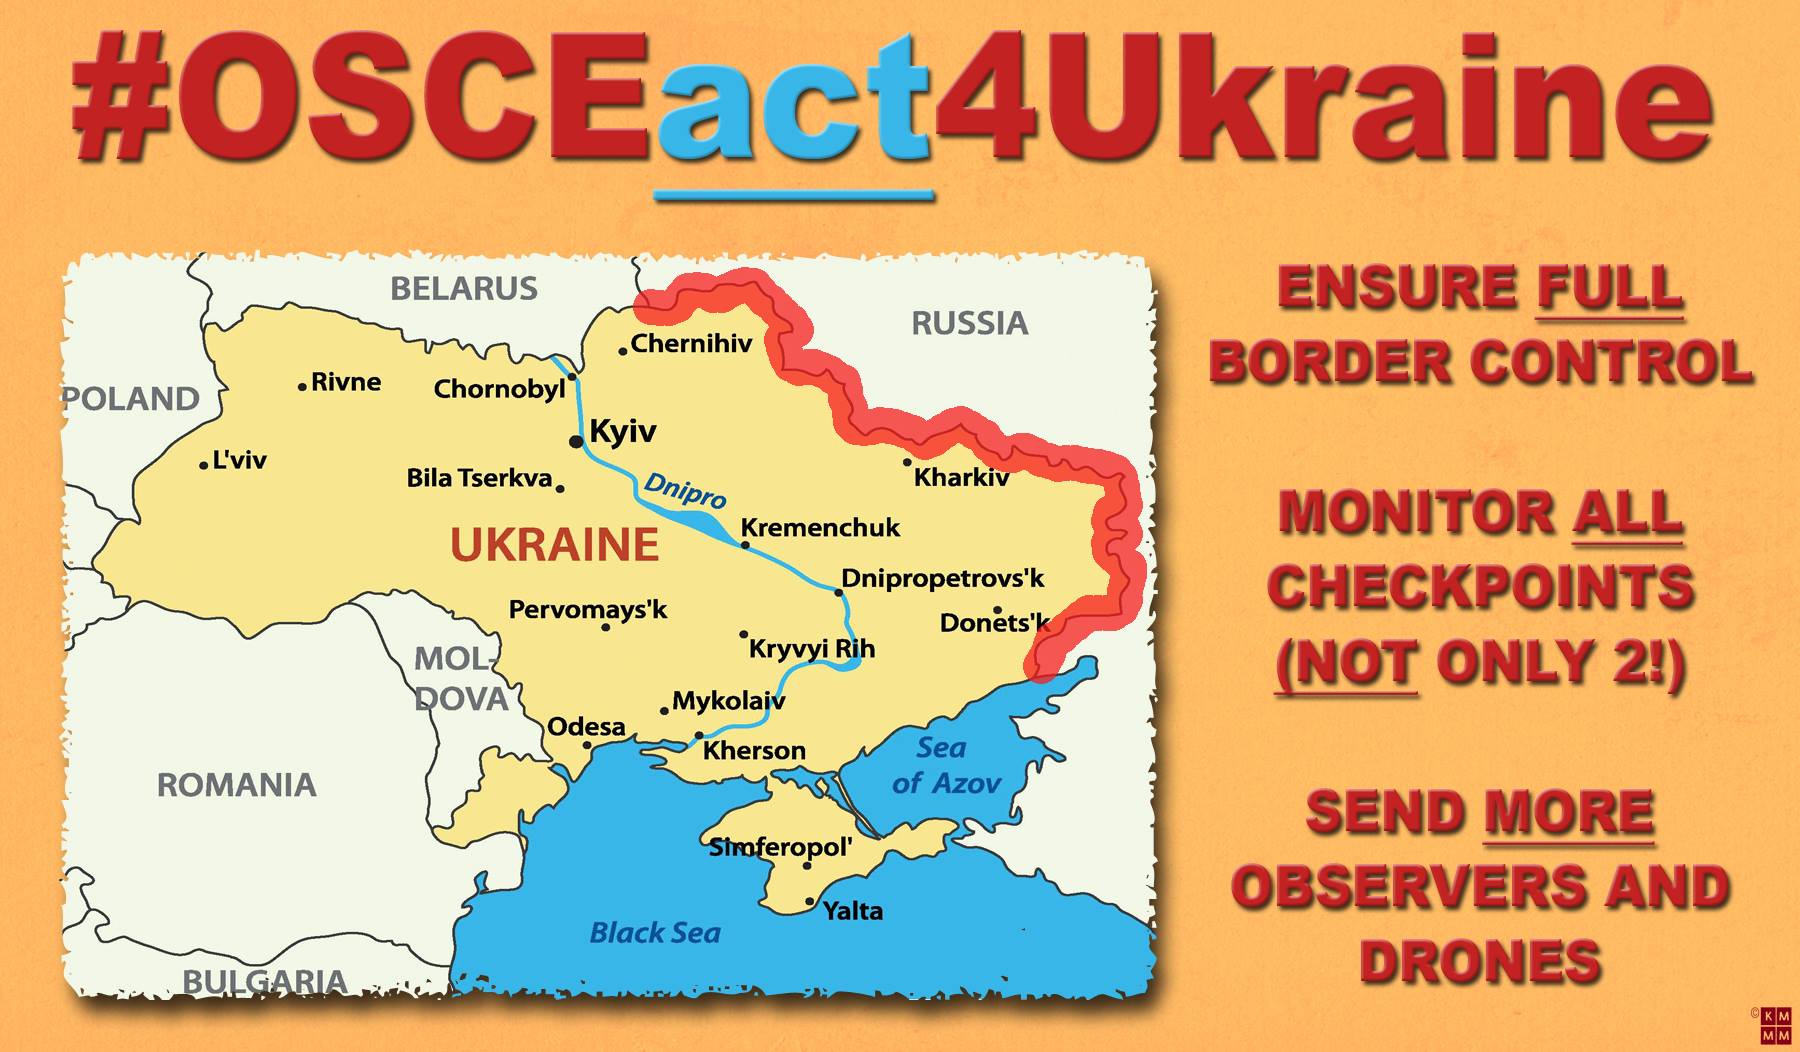 #OSCEact4Ukraine twitter storm on December 4 5, 2014, during OSCE Ministerial Council meeting in Basel